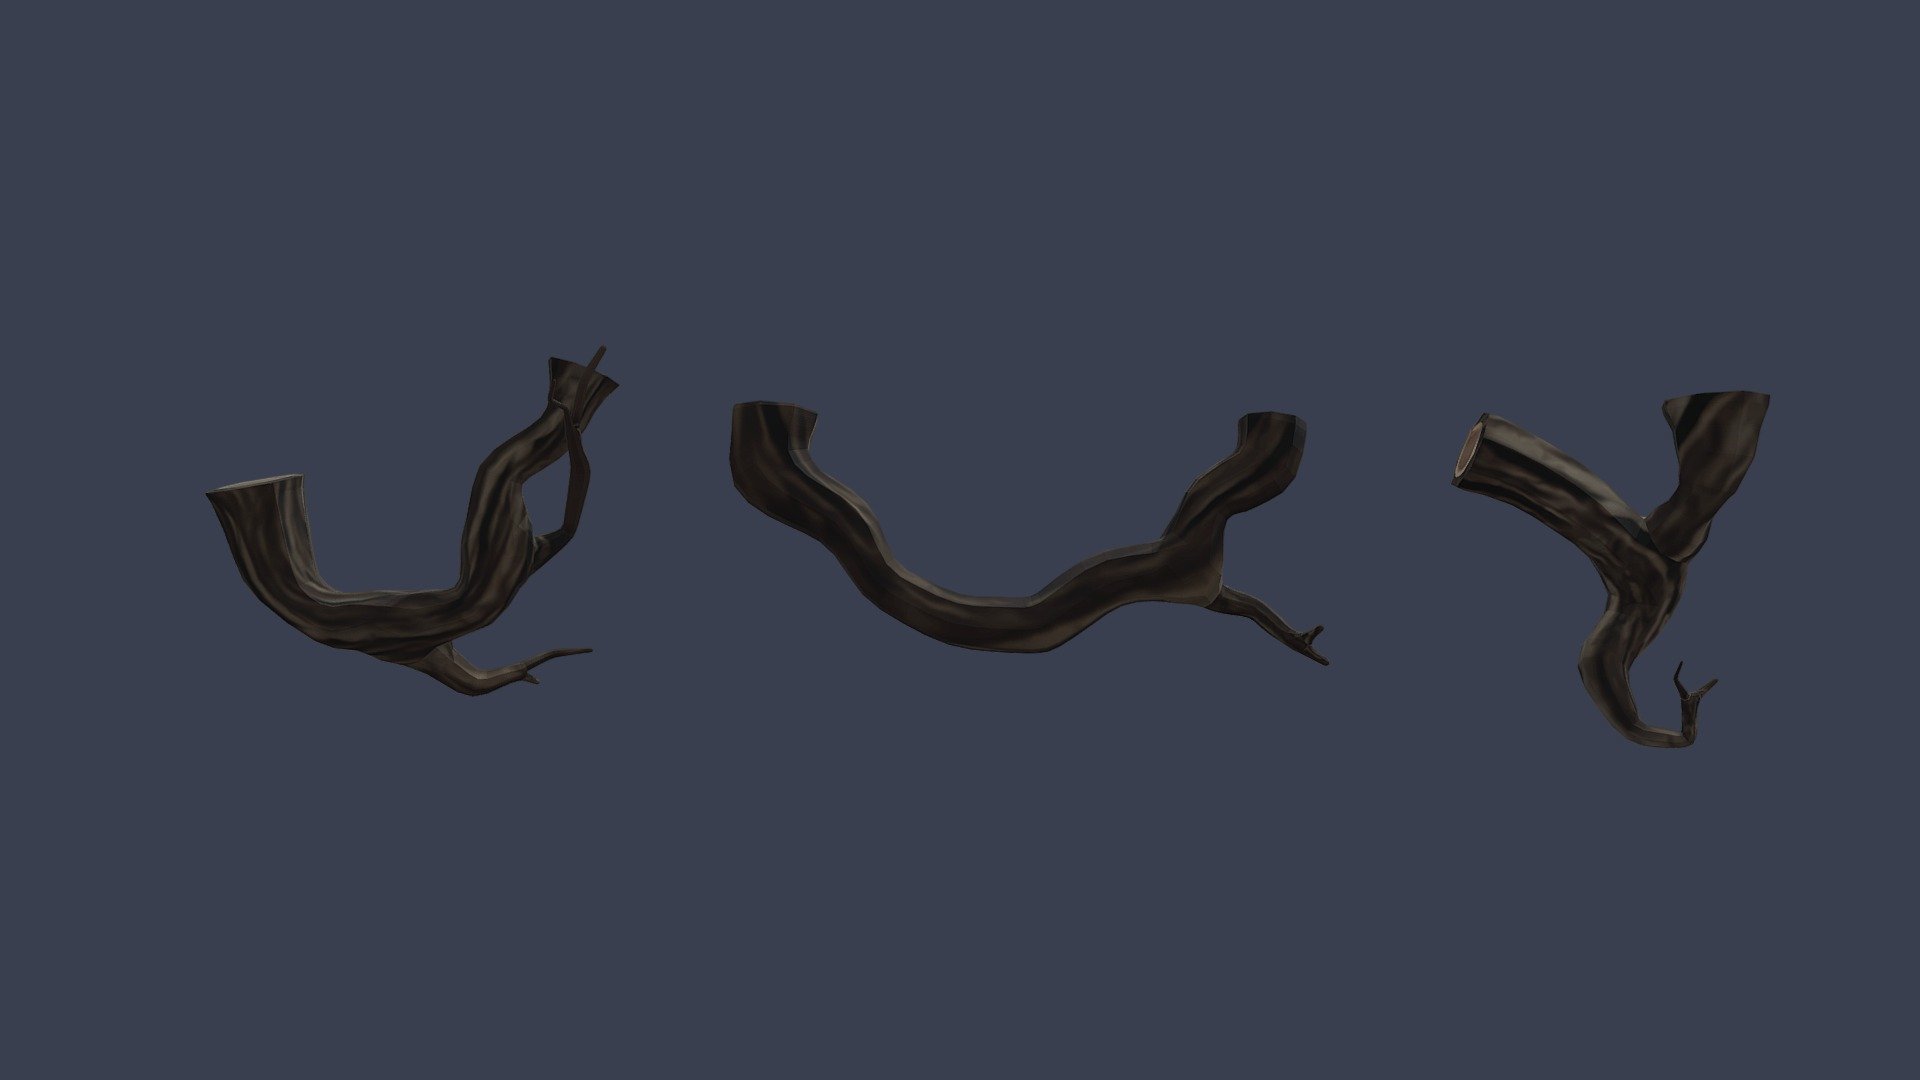 Small props for game project, feel free to use - Lowpoly roots - Download Free 3D model by Valo Niskanen (@Valo.Niskanen) 3d model